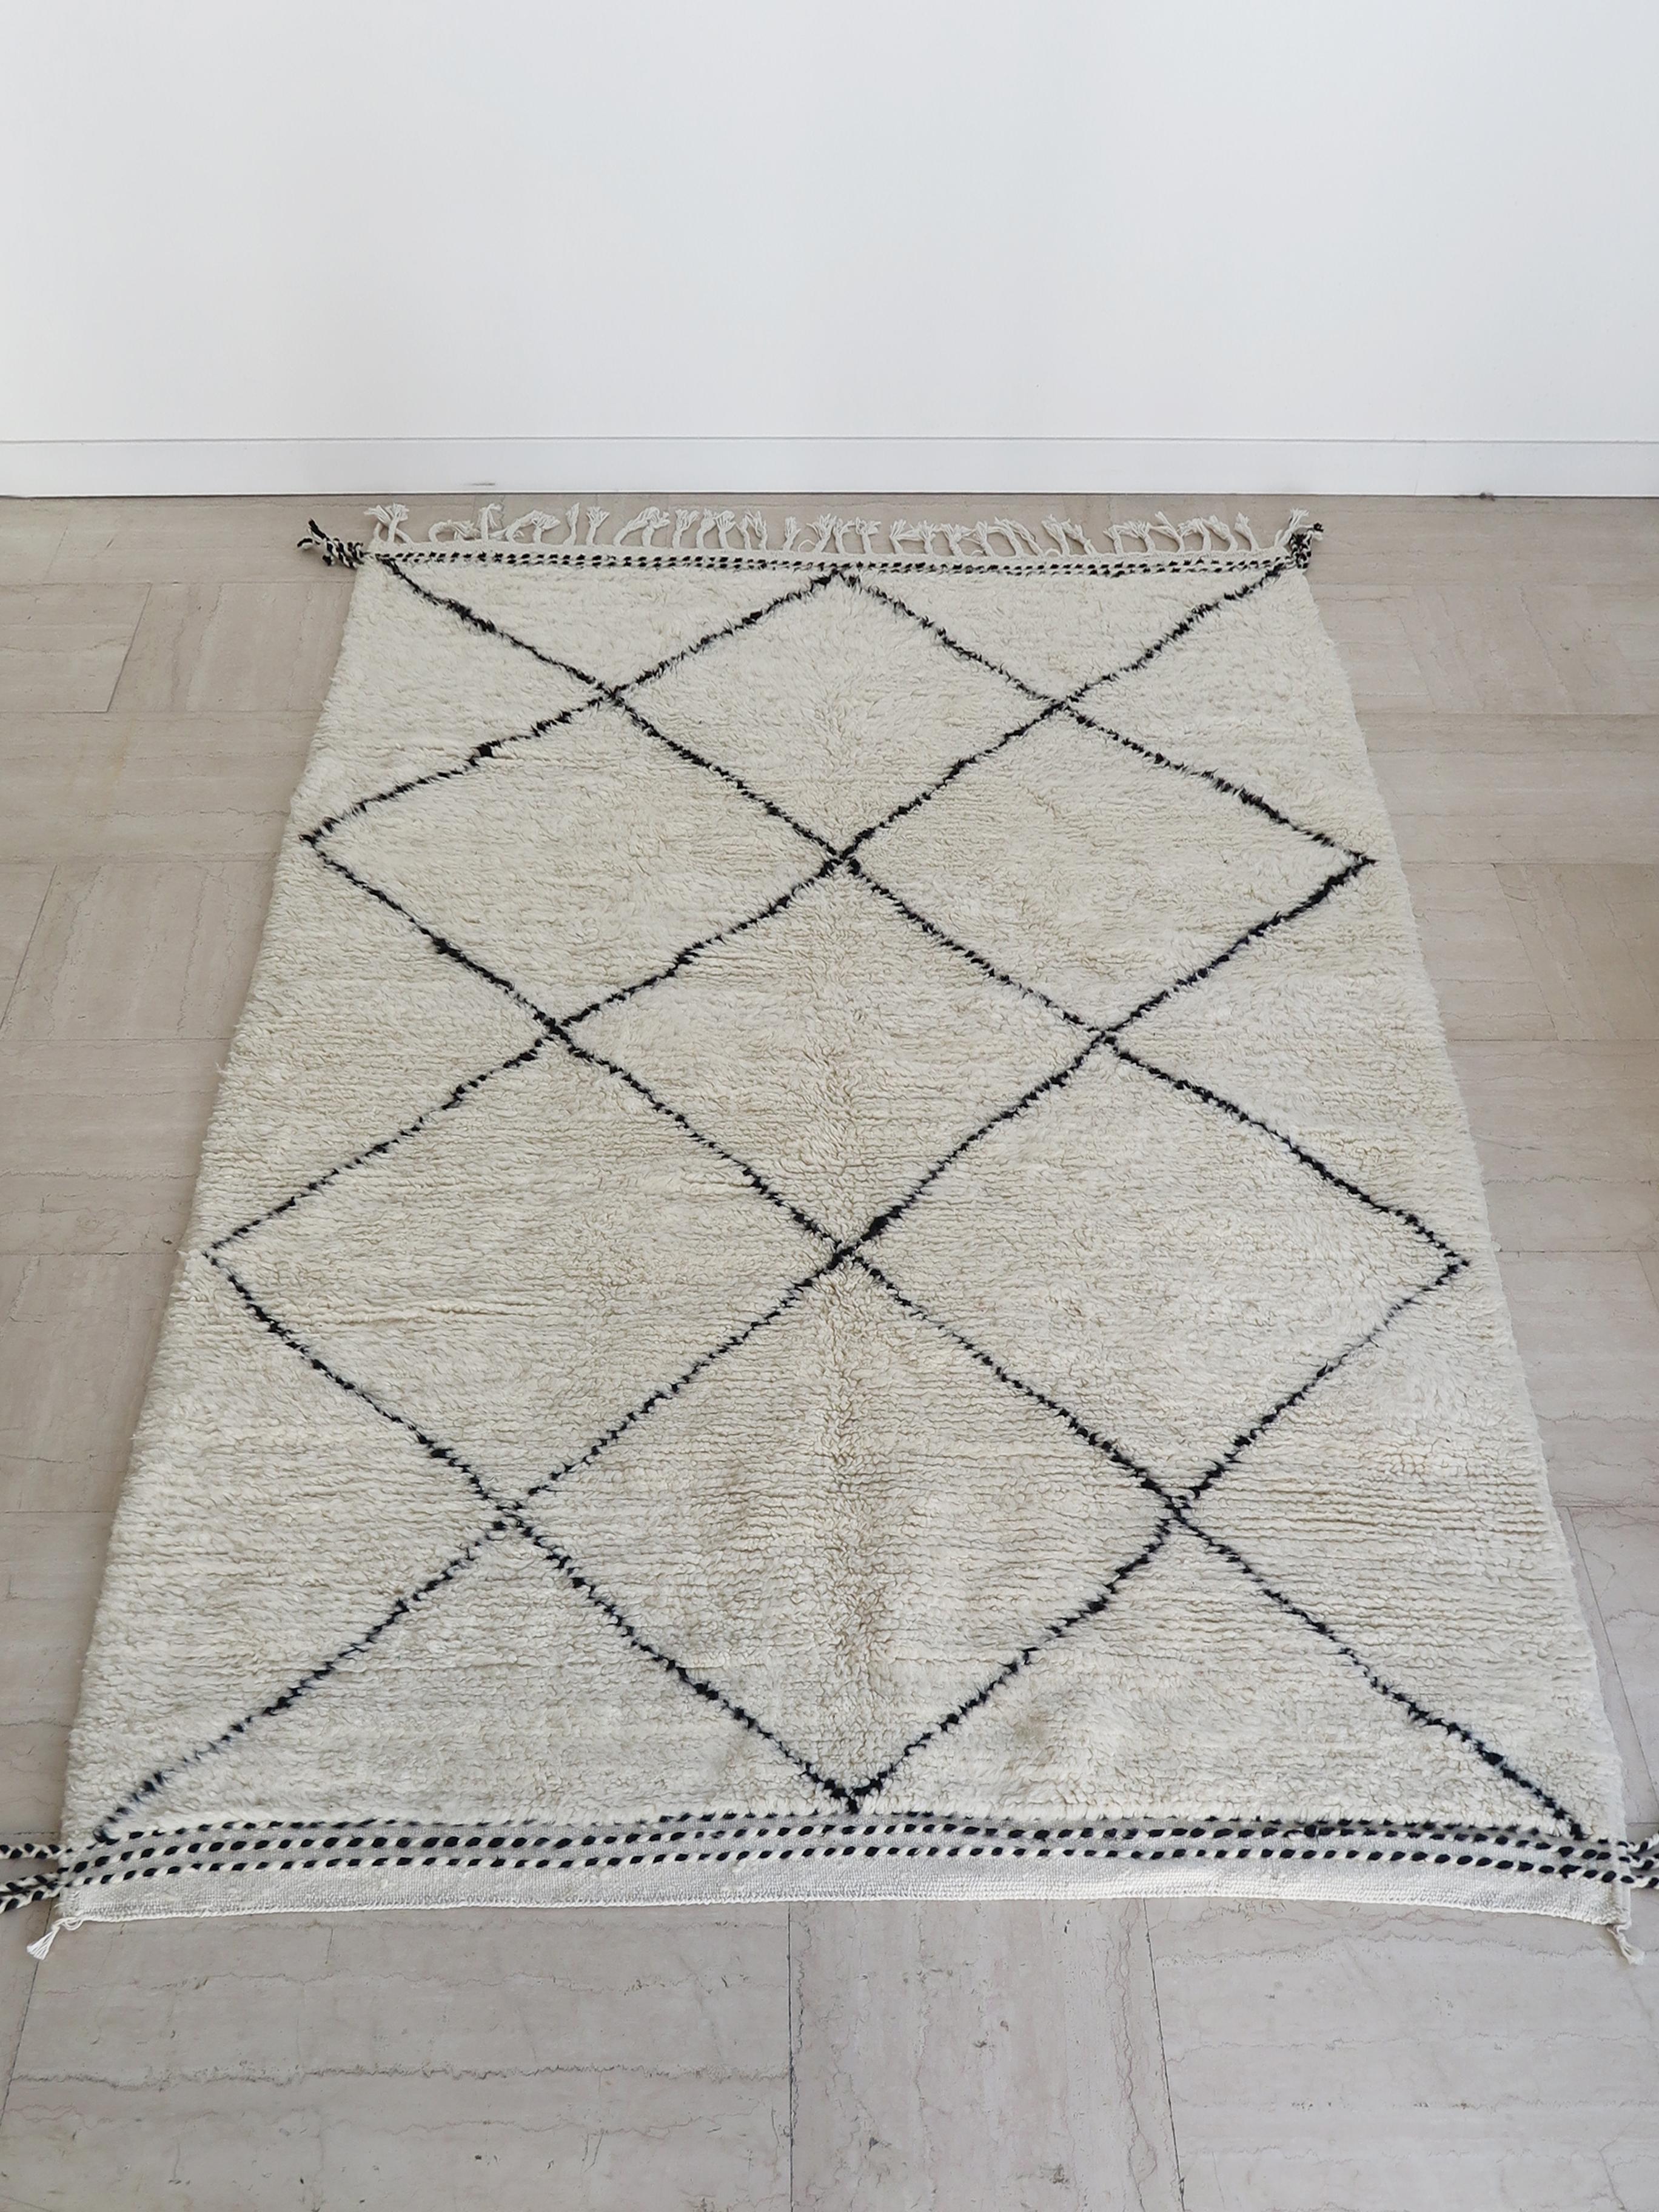 Handmade wool Berber rug carpet with contrasting graphic design,
Morocco production 2000s.